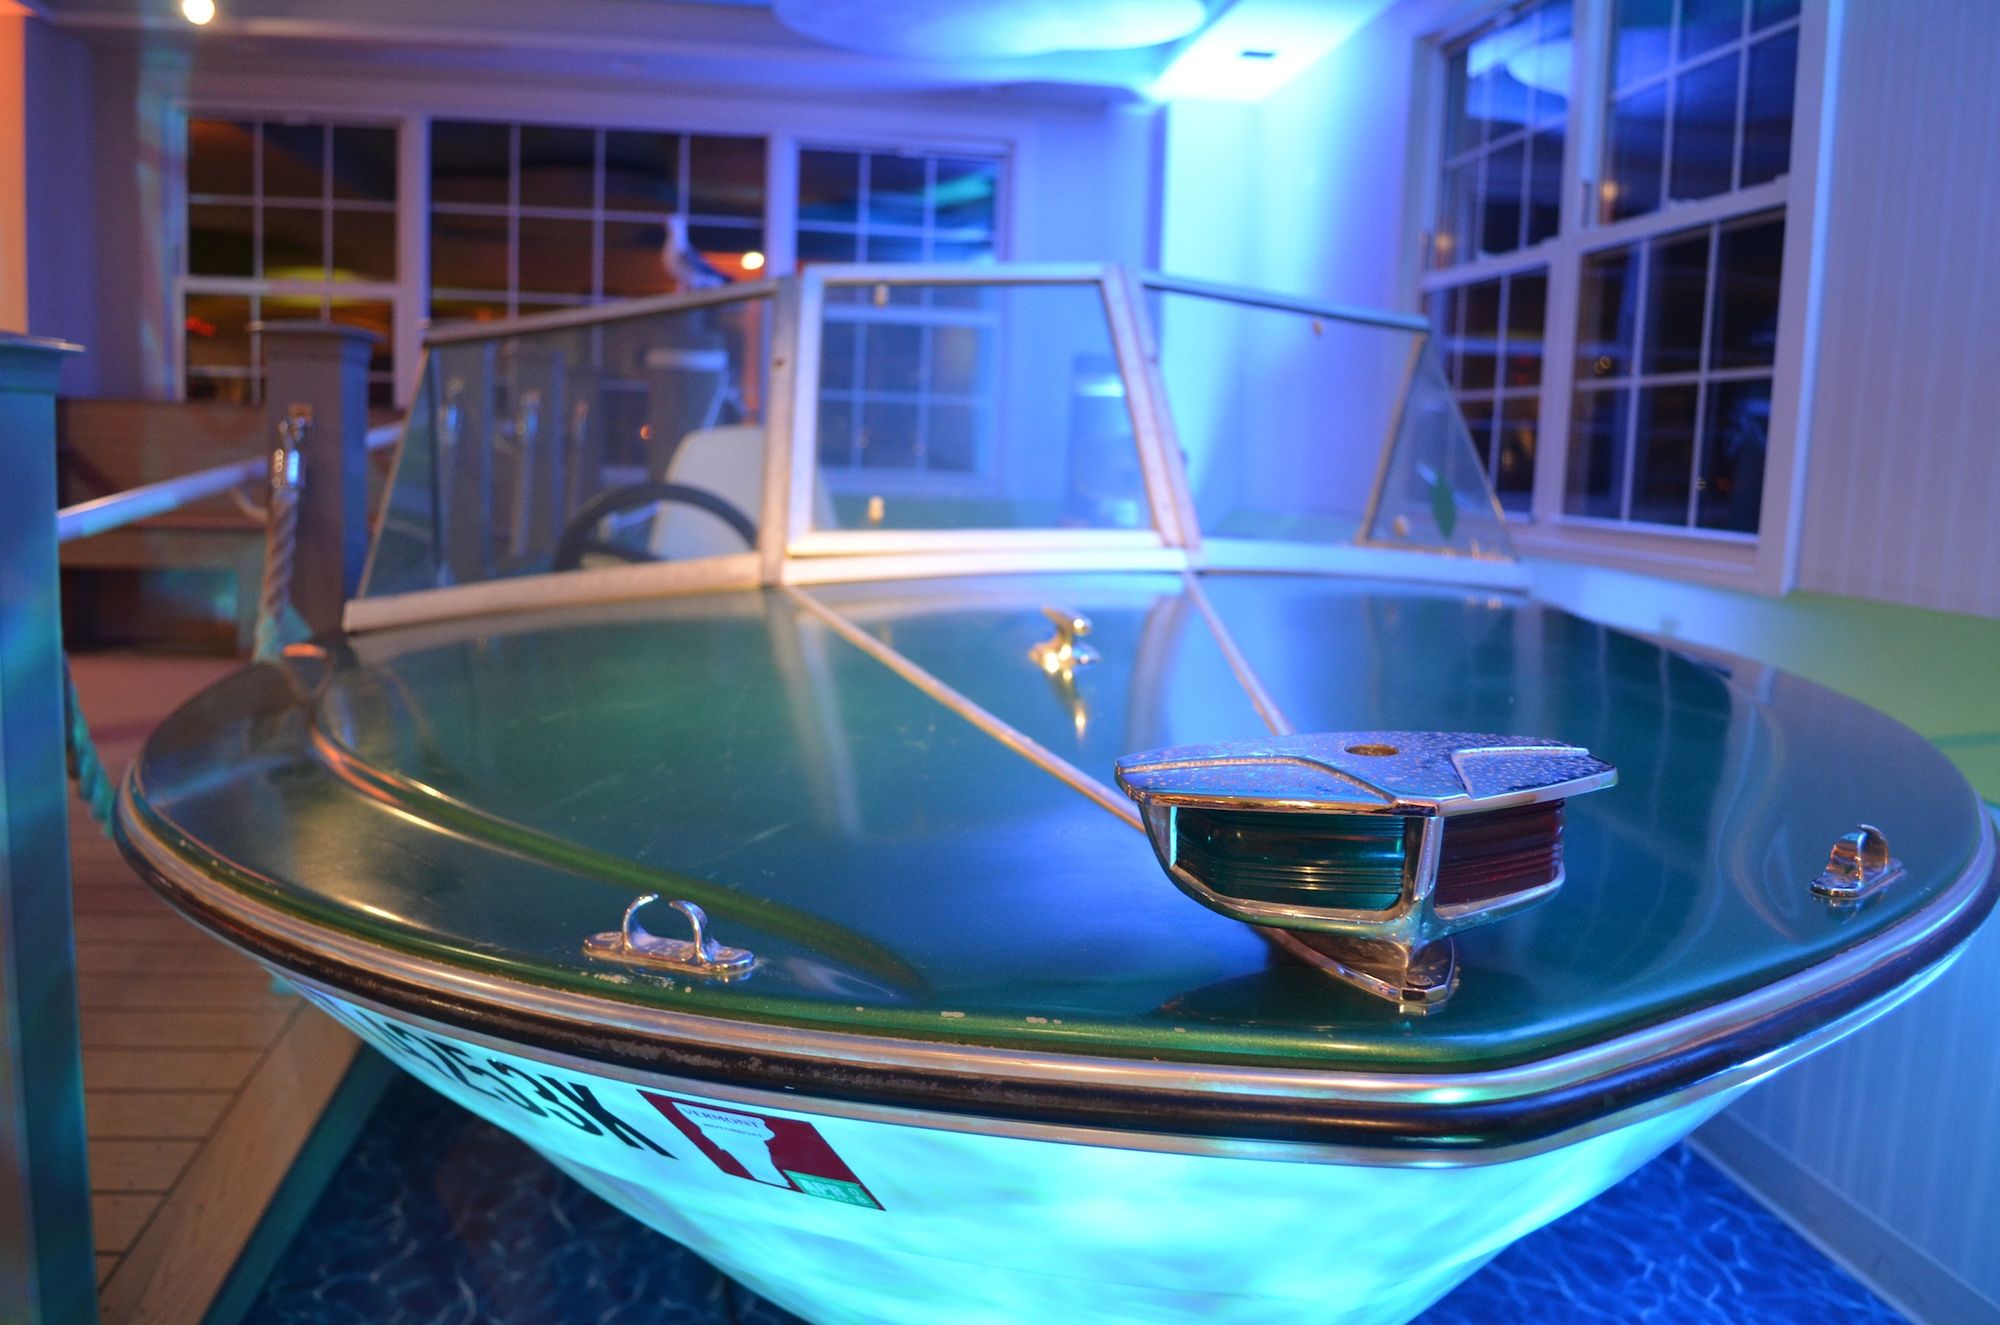 The boat at the rehab center.